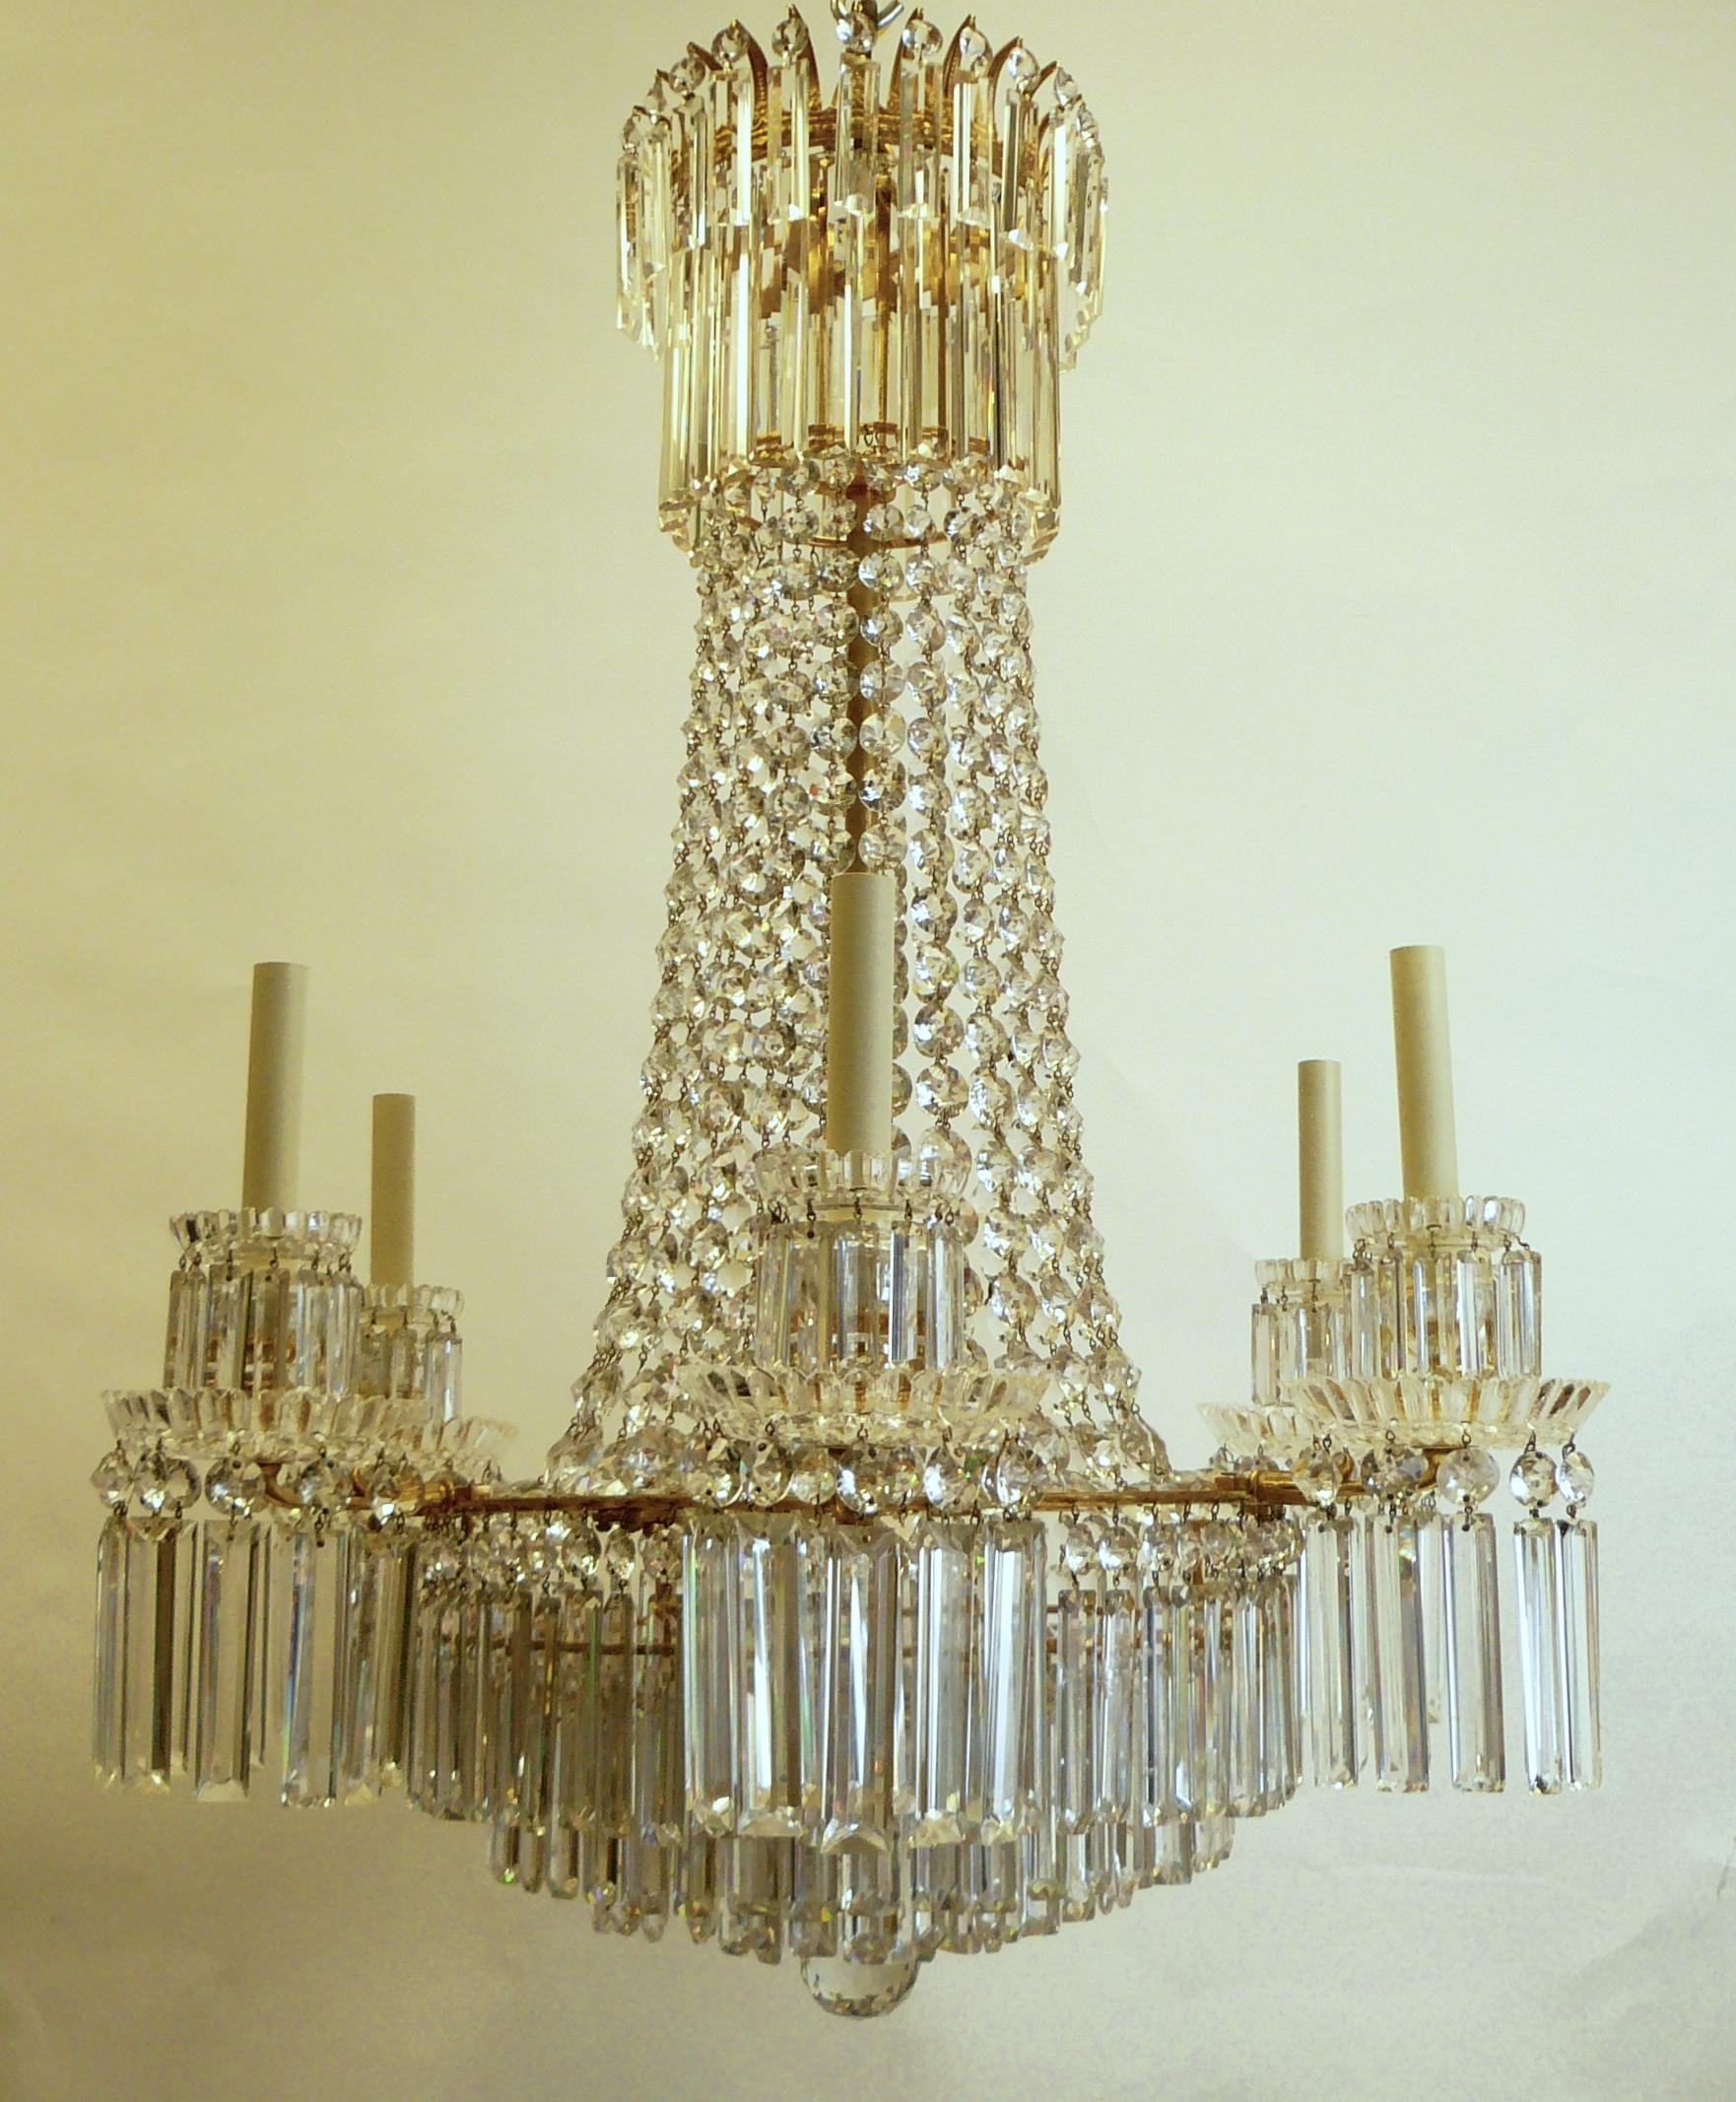 This fabulous chandelier is of the finest quality, and features lapidary rule cut, or 